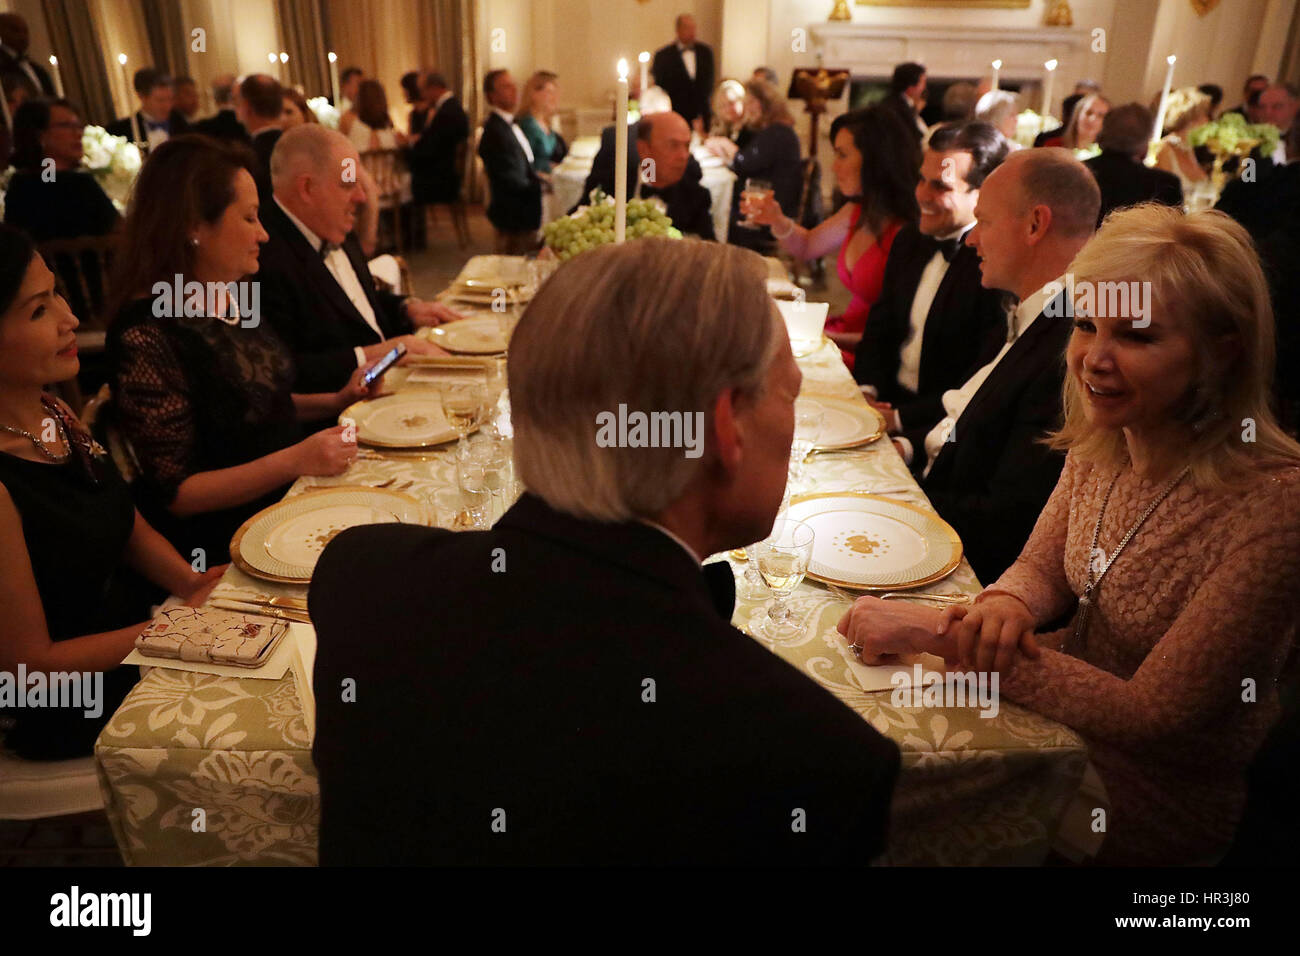 Washington DC, USA. 26th February 2017. Texas Governor Greg Abbott (back to camera), Maryland Governor Larry Hogan and other sit together during the annual Governors Dinner in the East Room of the White House February 26, 2017 in Washington, DC. Part of the National Governors Association's annual meeting in the nation's capital, the black tie dinner and ball is the first formal event the Trumps will host at the White House since moving in last month. Credit: Chip Somodevilla/Pool via CNP /MediaPunch/Alamy Live News Stock Photo